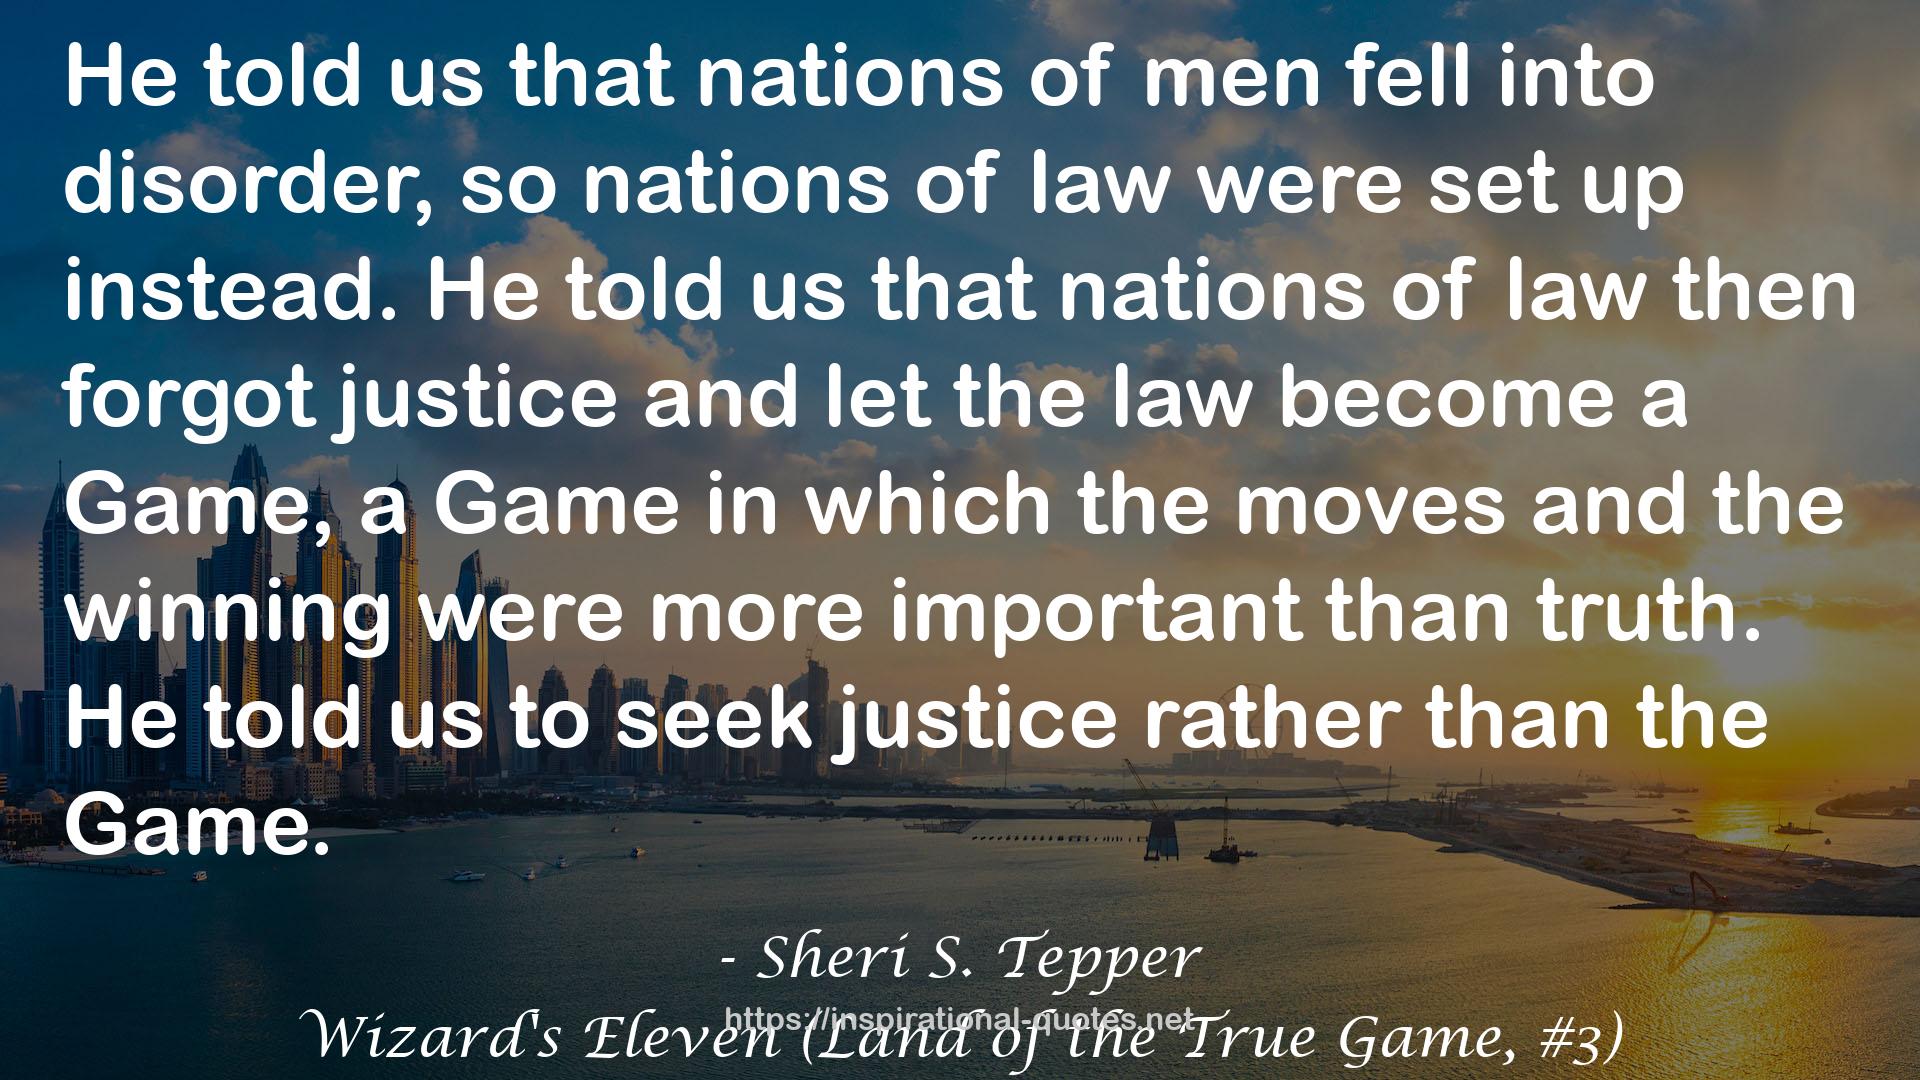 Wizard's Eleven (Land of the True Game, #3) QUOTES